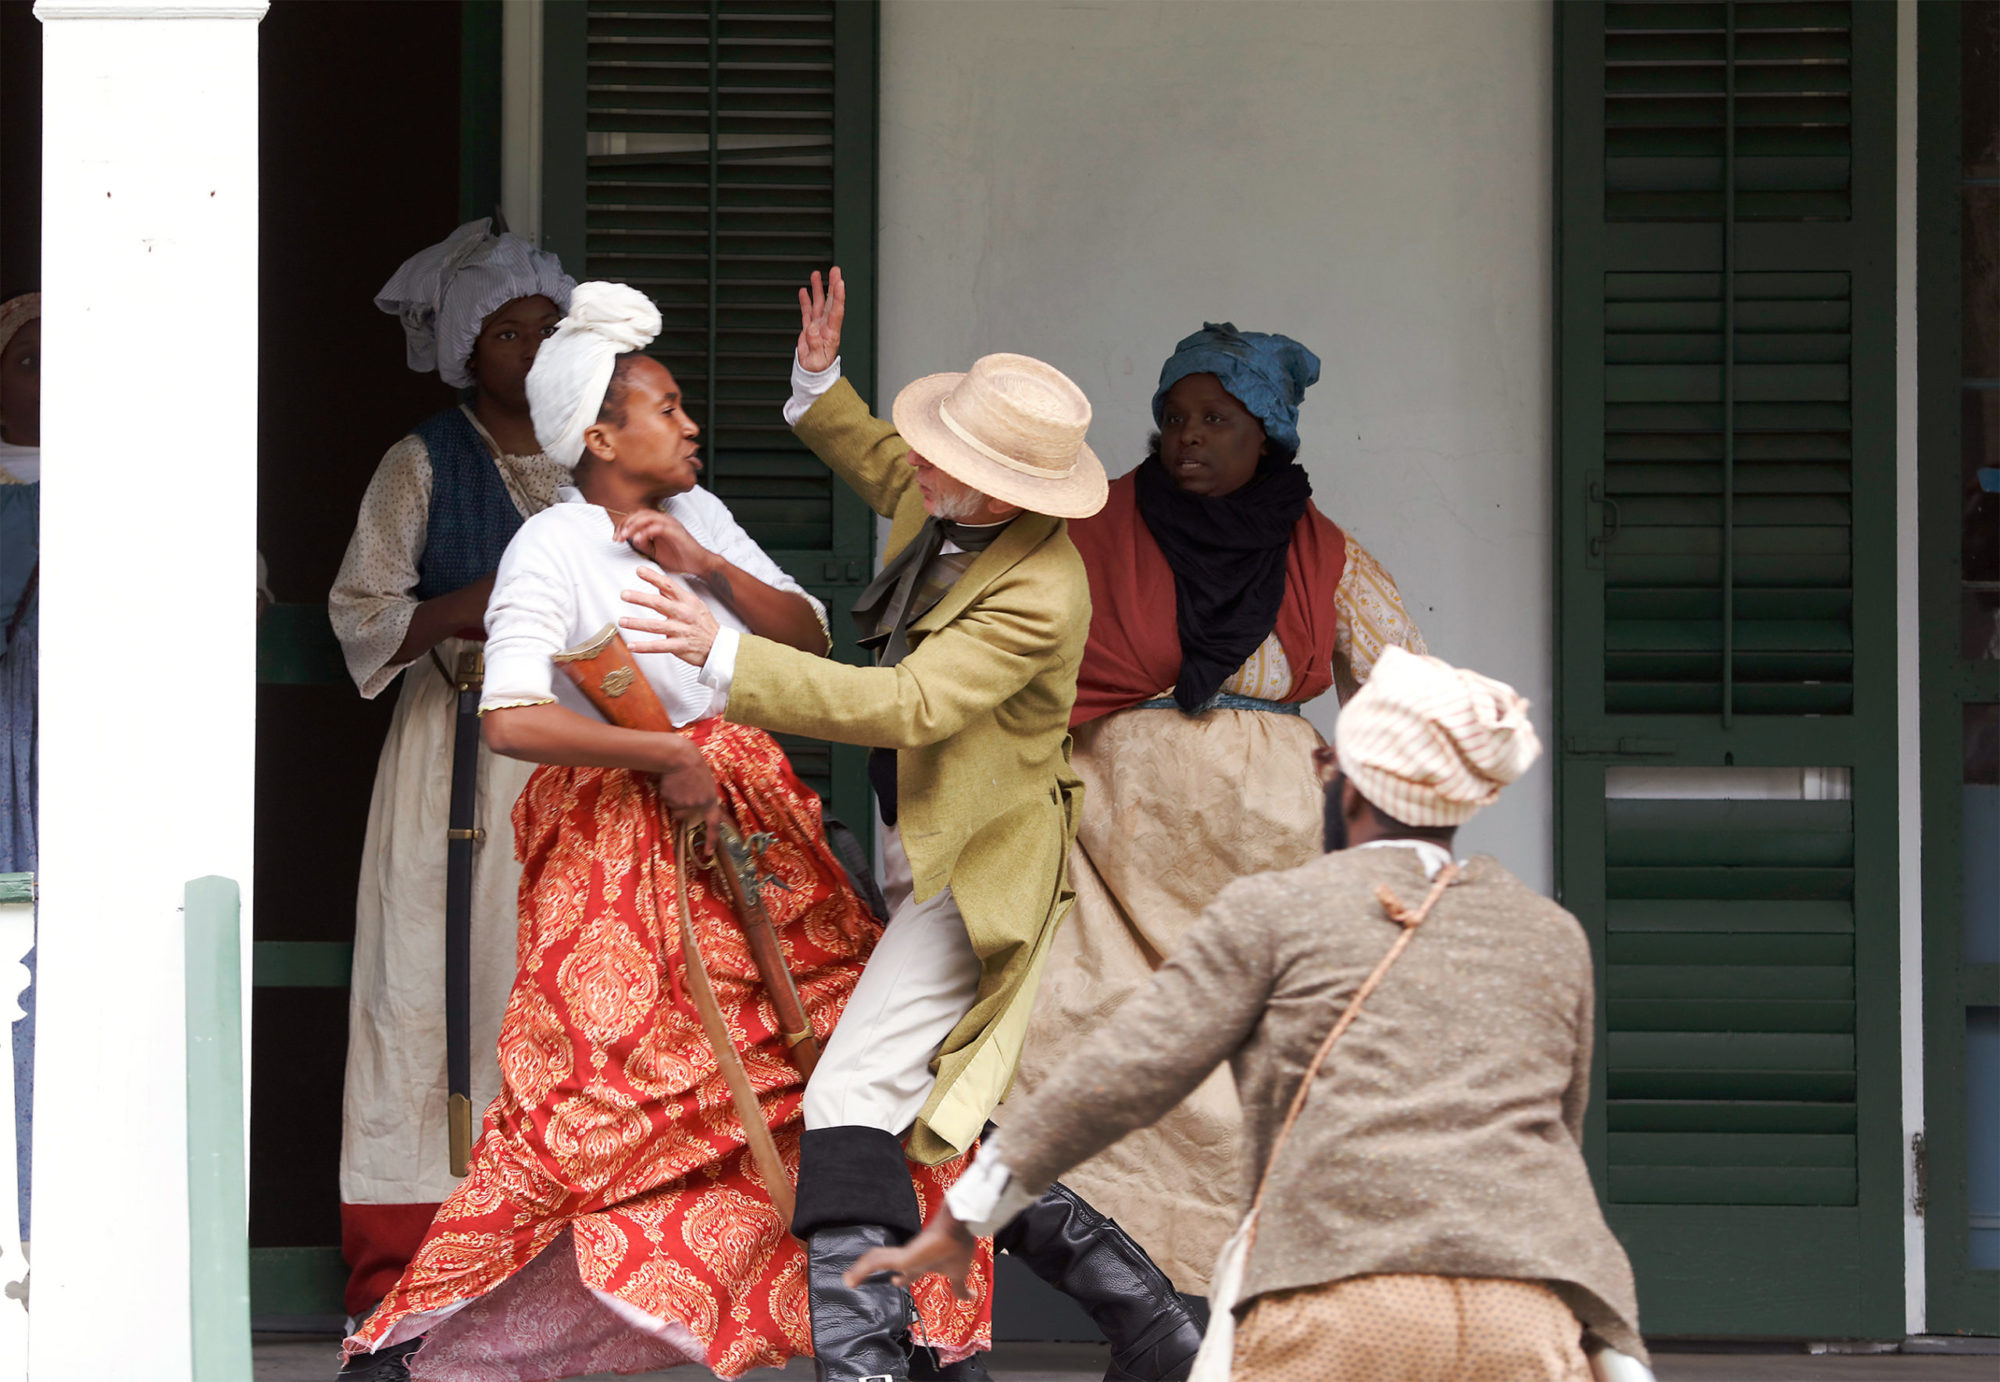 Documentation of the Slave Rebellion Reenactment, a White man in historical dress confronts a gun-wielding Black woman in historical dress